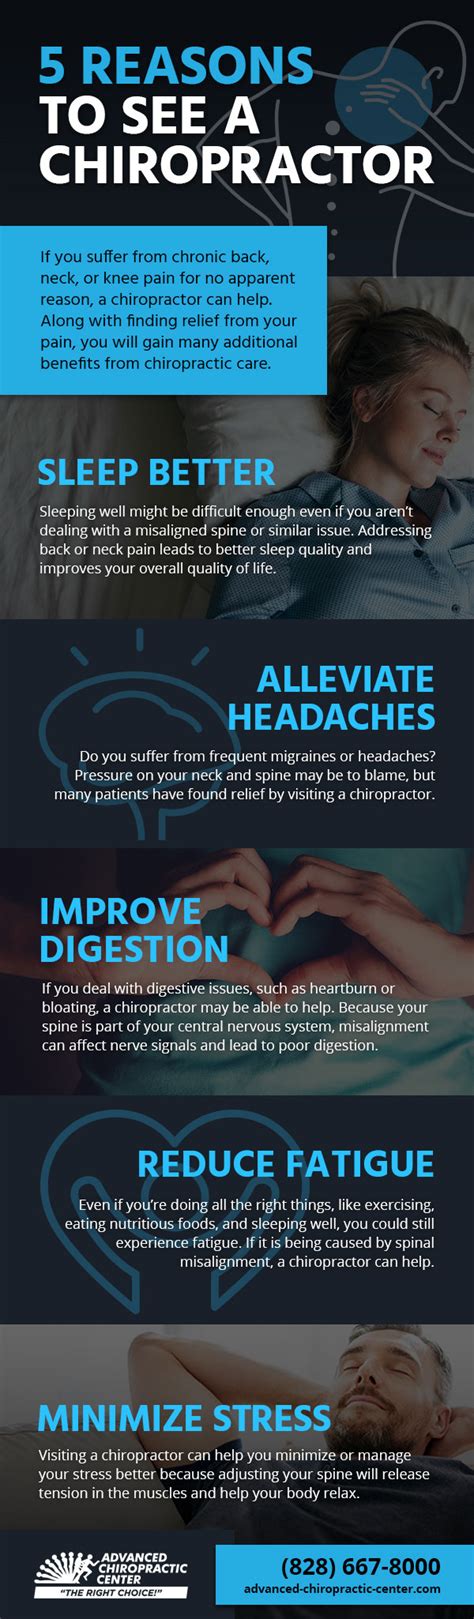 5 Reasons To See A Chiropractor Infographic Advanced Chiropractic